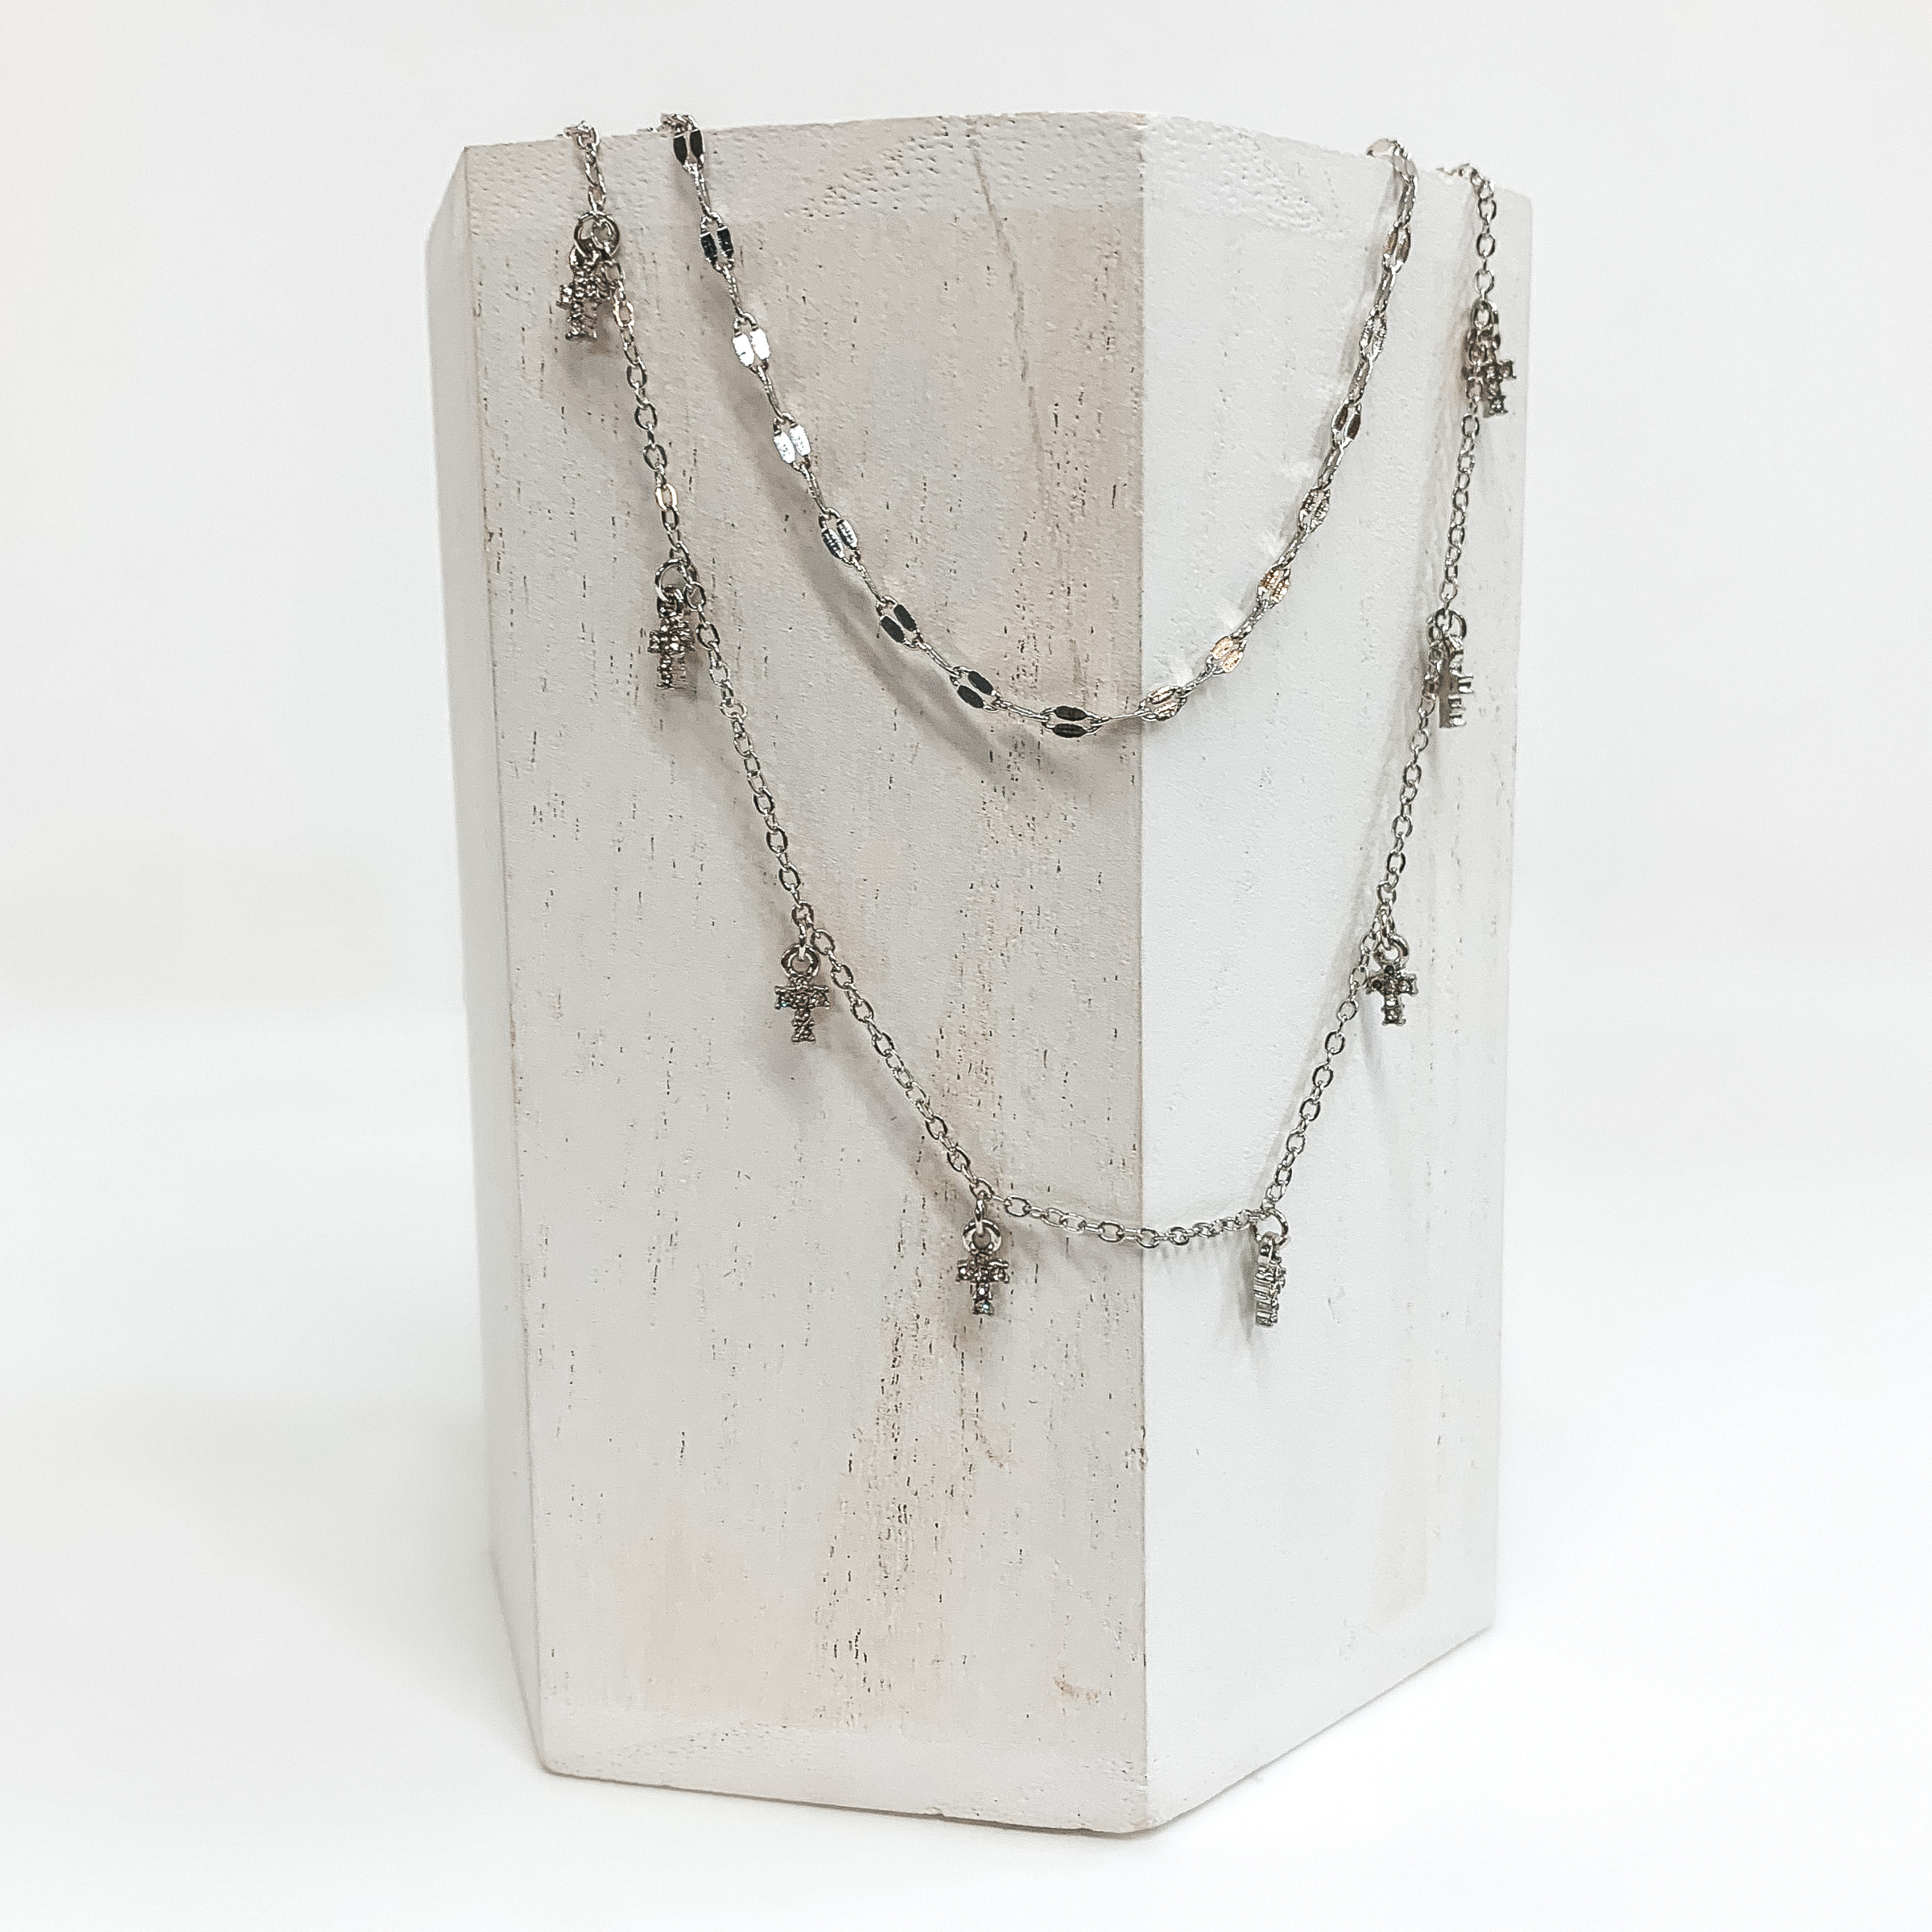 Glimmer of Hope Dainty Cross Necklace in Silver - Giddy Up Glamour Boutique